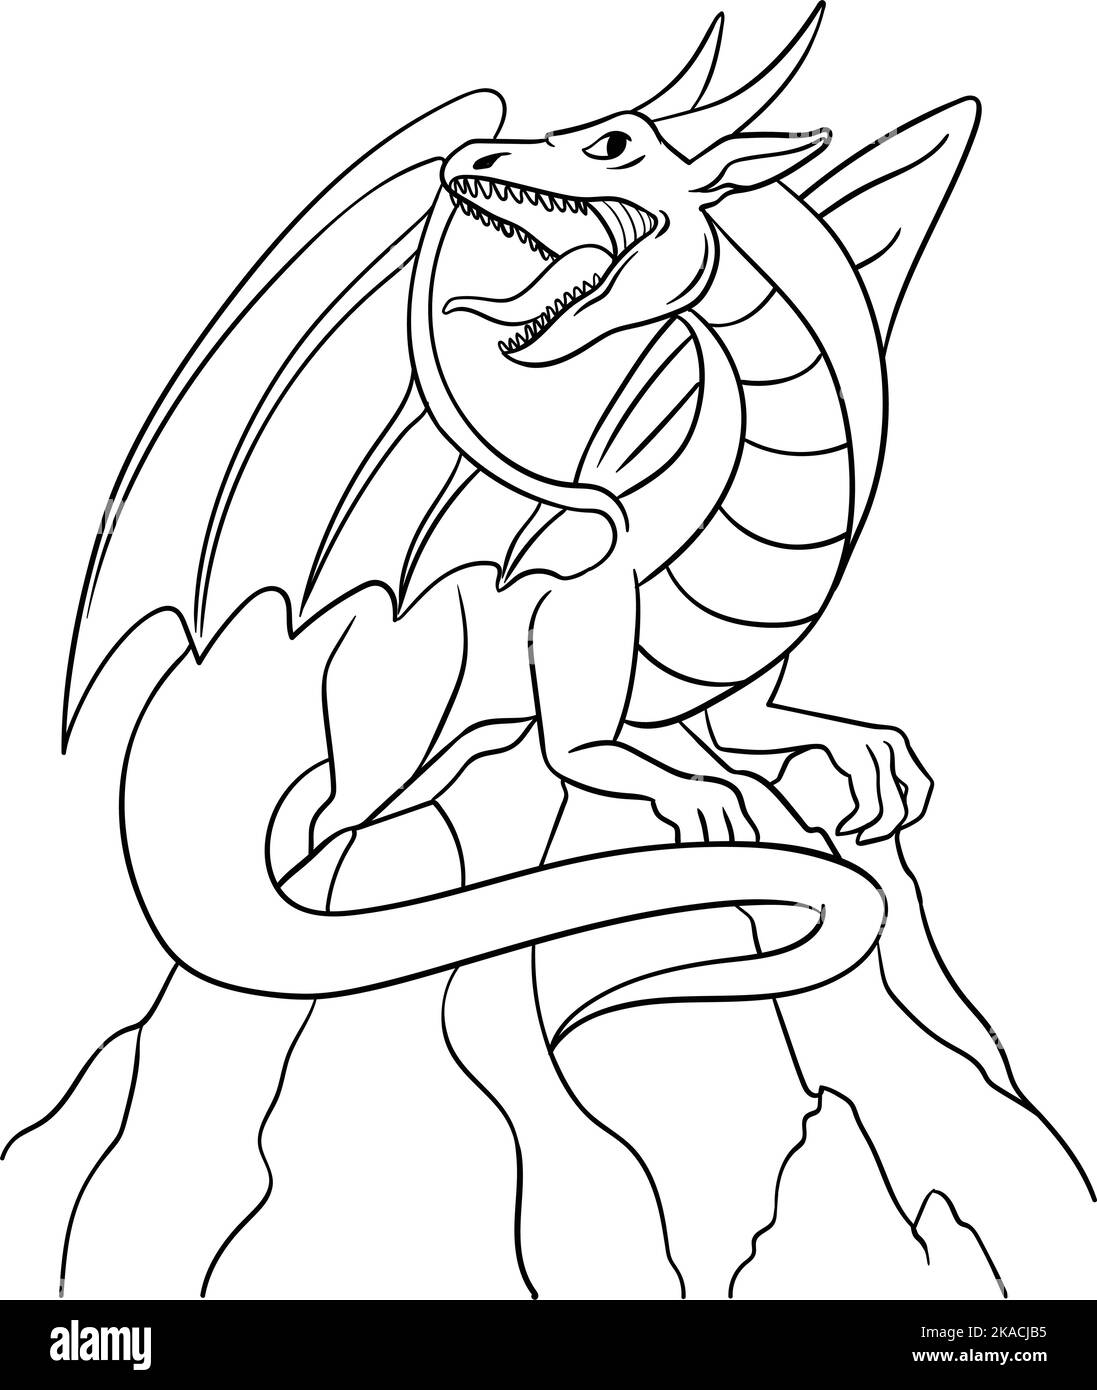 Dragon Isolated Coloring Page for Kids Stock Vector